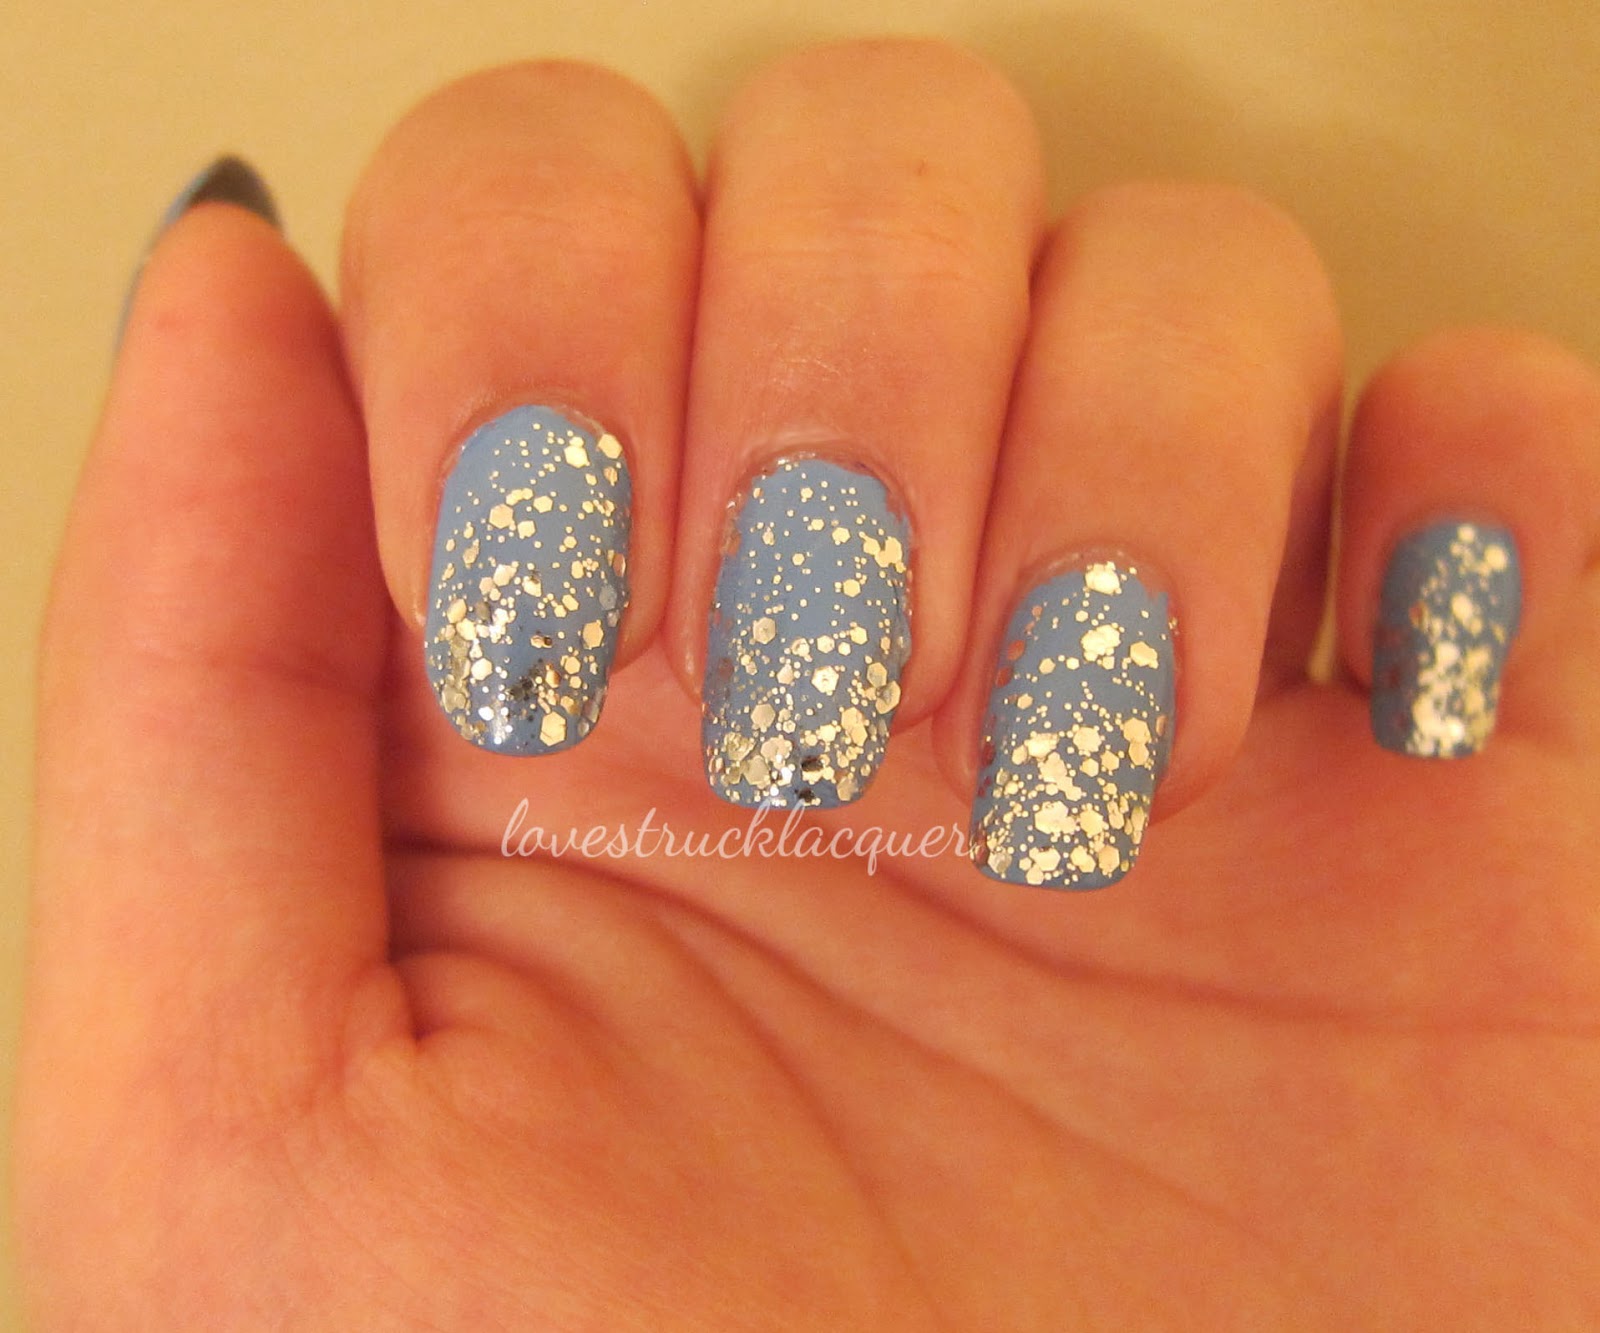 Lovestruck Lacquer: Orly Snowcone gradient with Essie Set in Stones ...